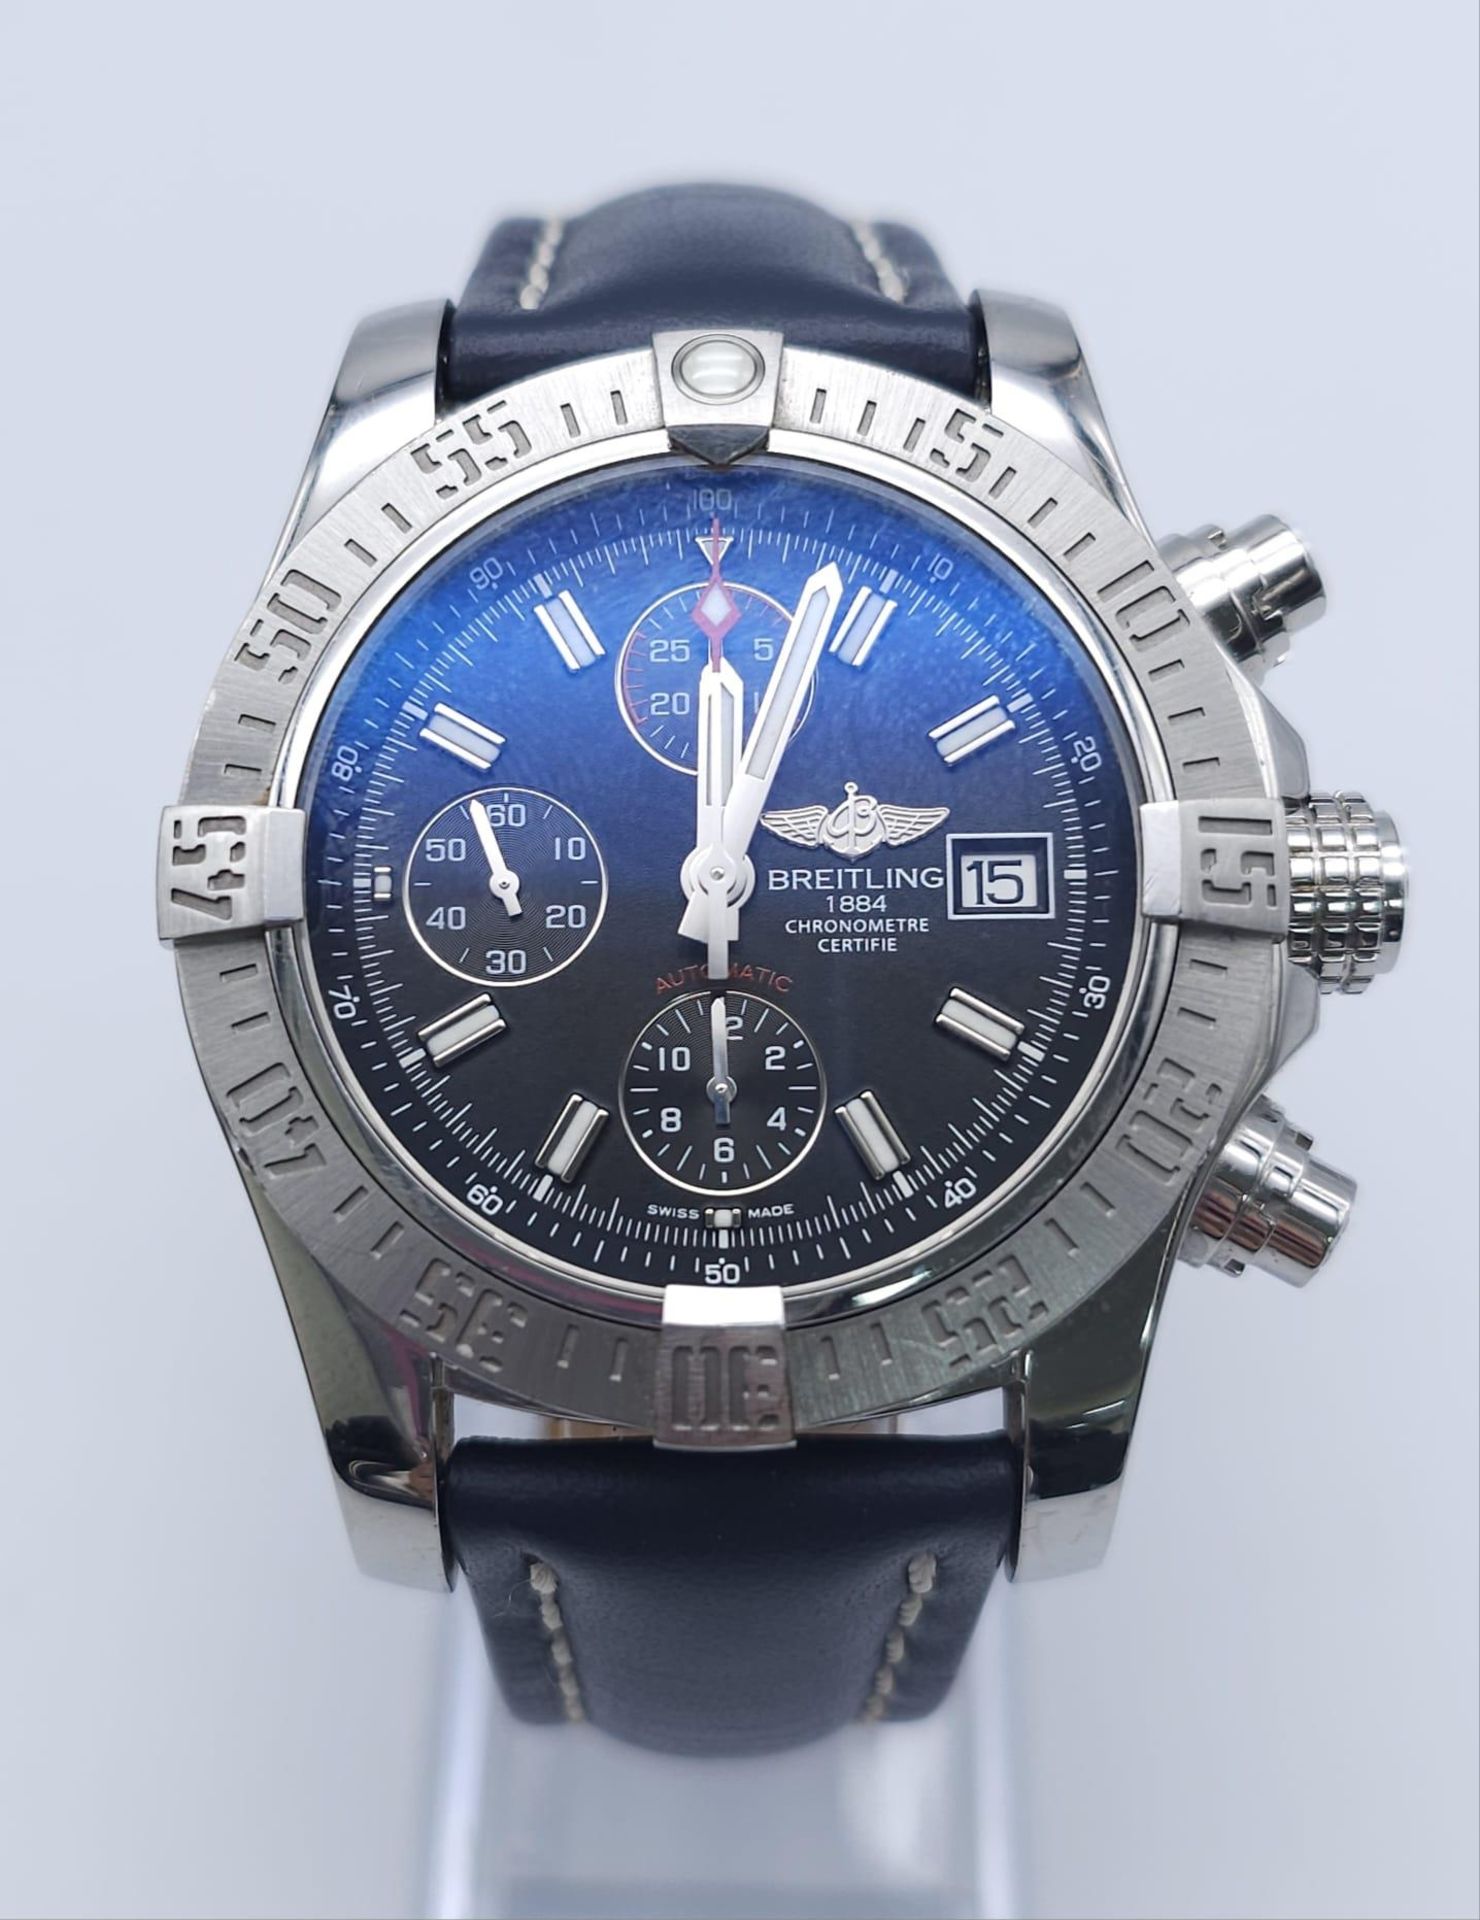 A Breitling Automatic Chronograph Avenger II Gents Watch. Blue leather strap. Stainless steel case -